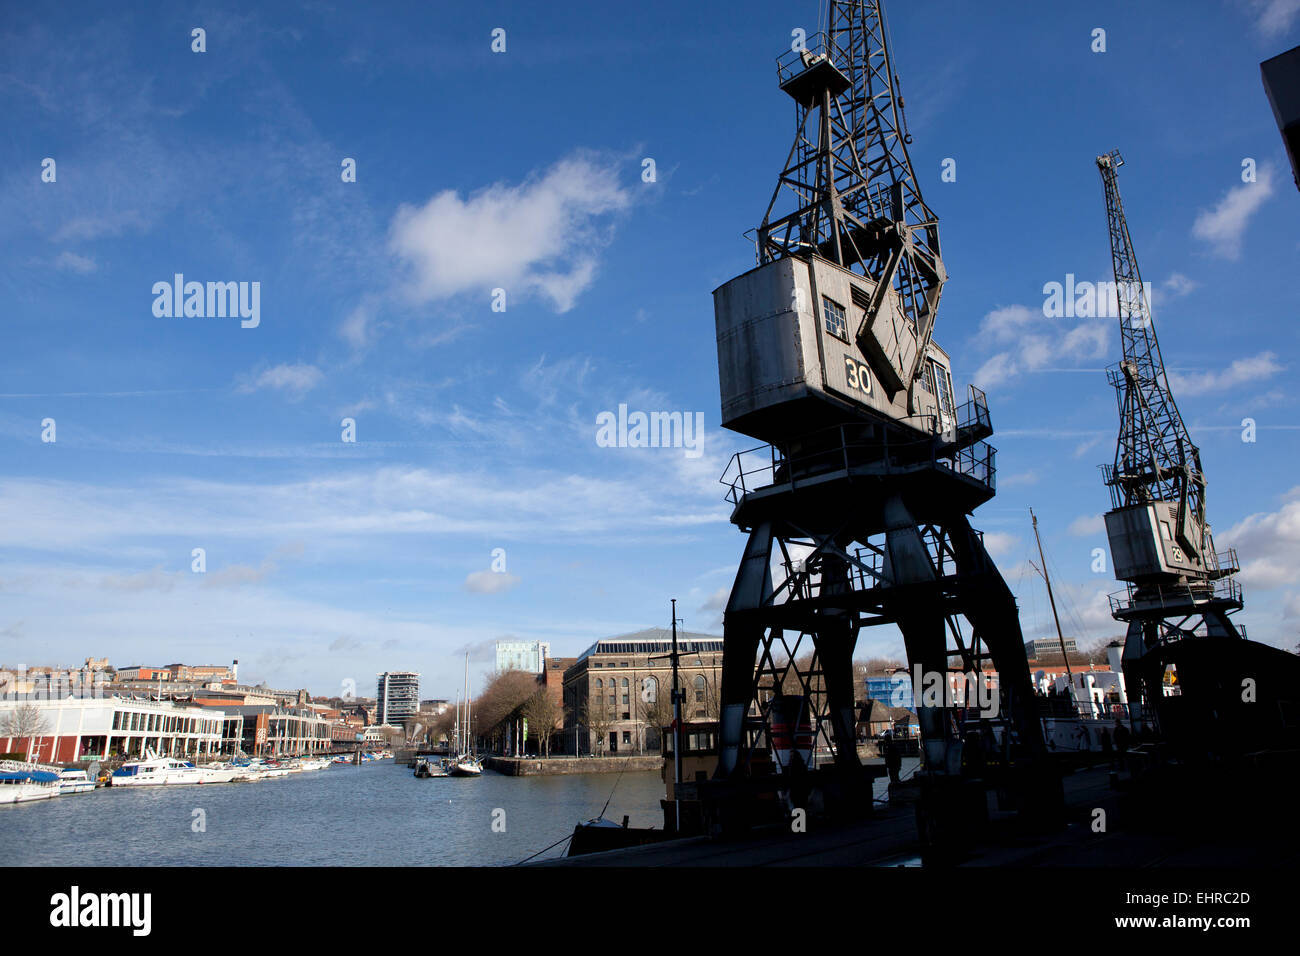 Old cranes on the historic harbour in Bristol England Stock Photo